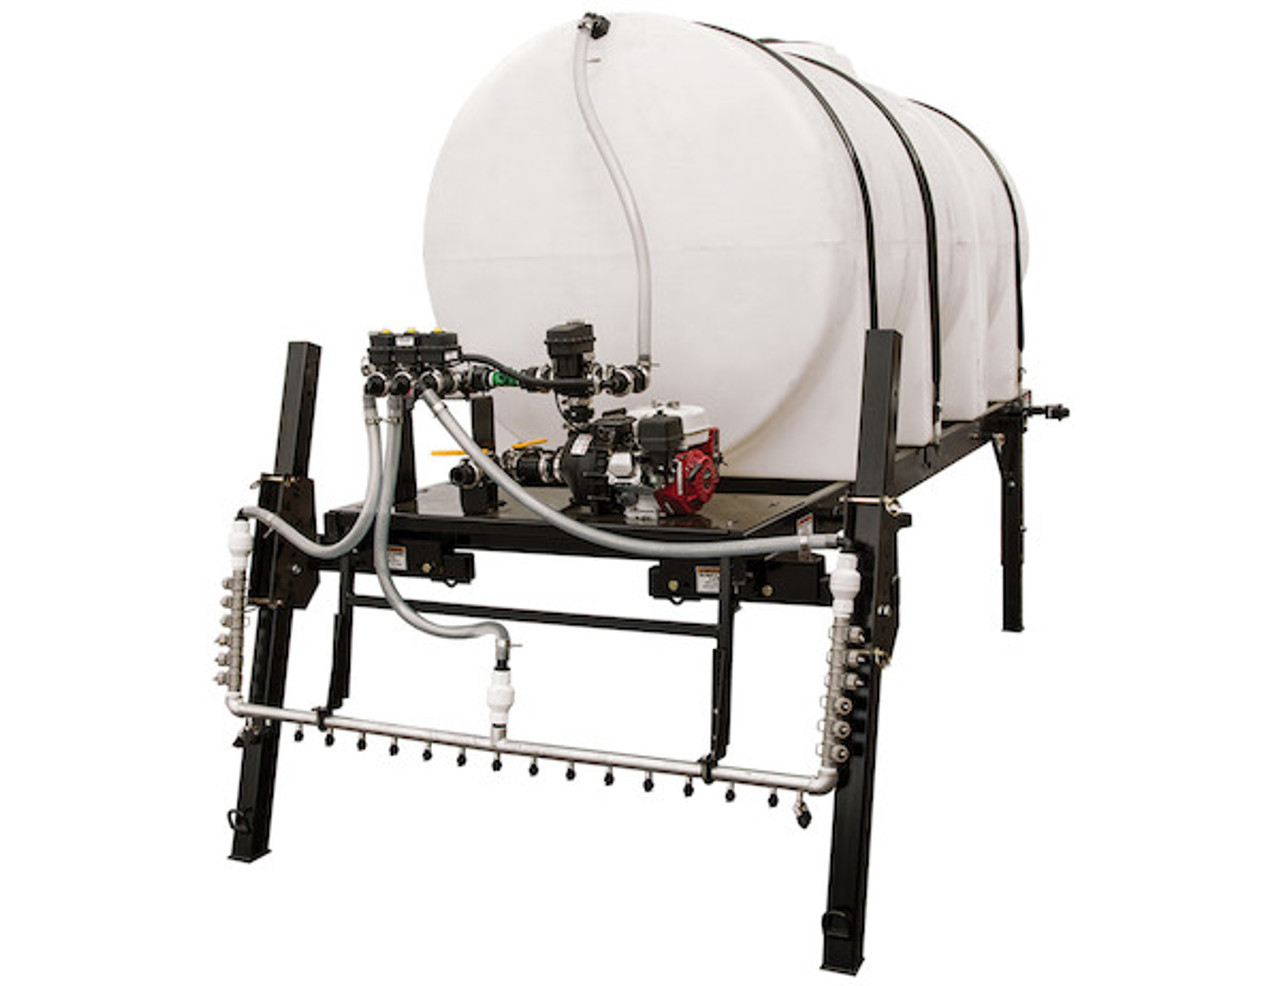 6191615 - 1065 Gallon Gas-Powered Anti-Ice System with Three-Lane Spray Bar and Manual Application Rate Control